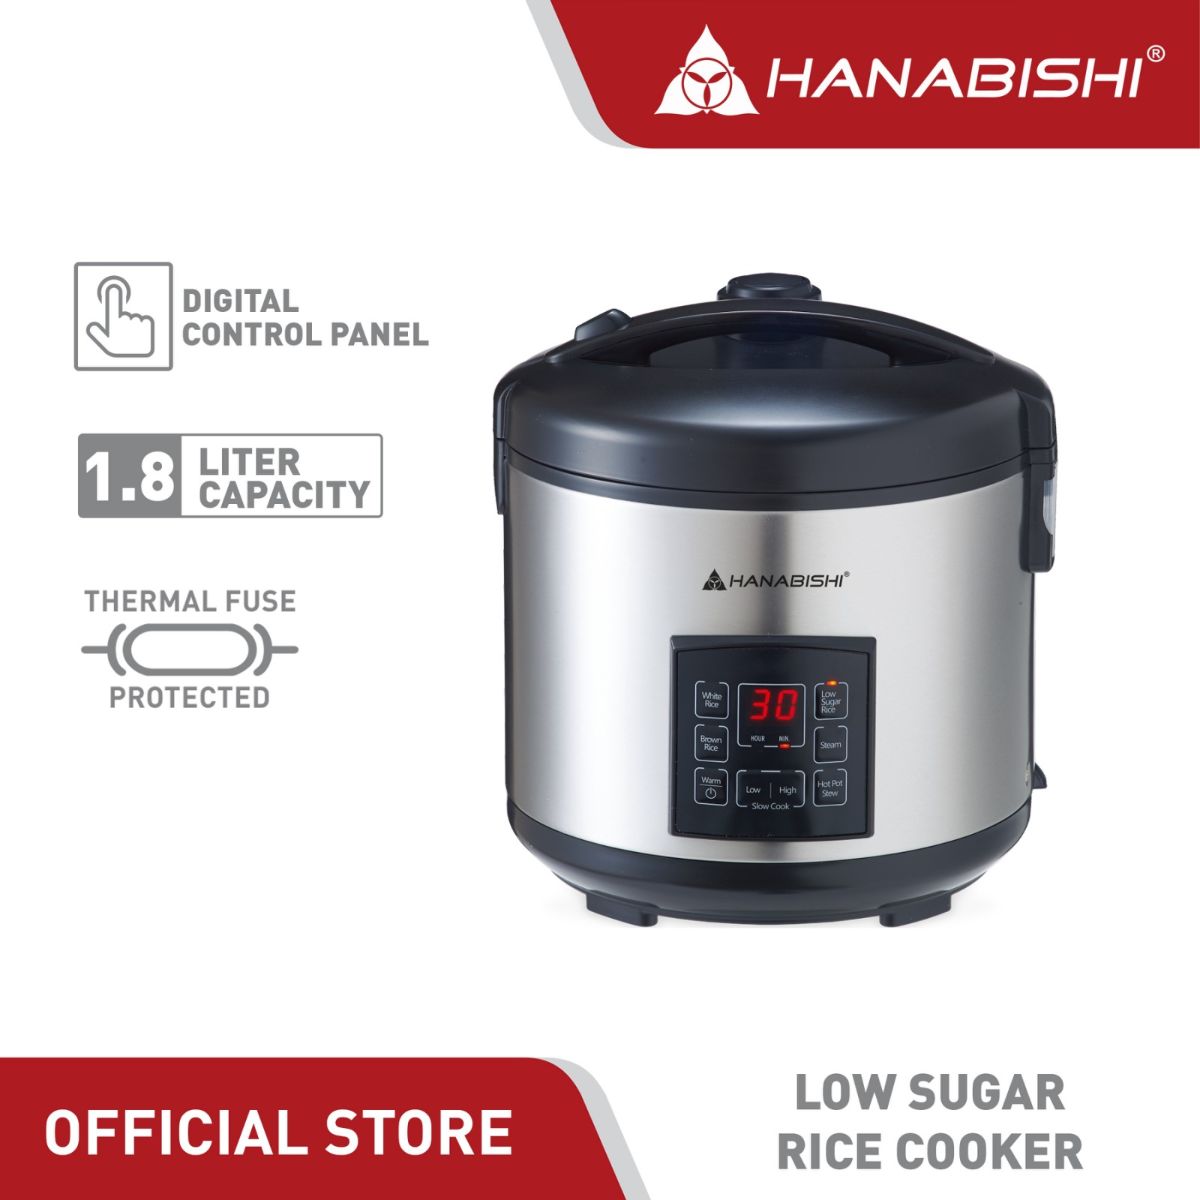 Features Of The Hanabishi Low-Sugar Rice Cooker